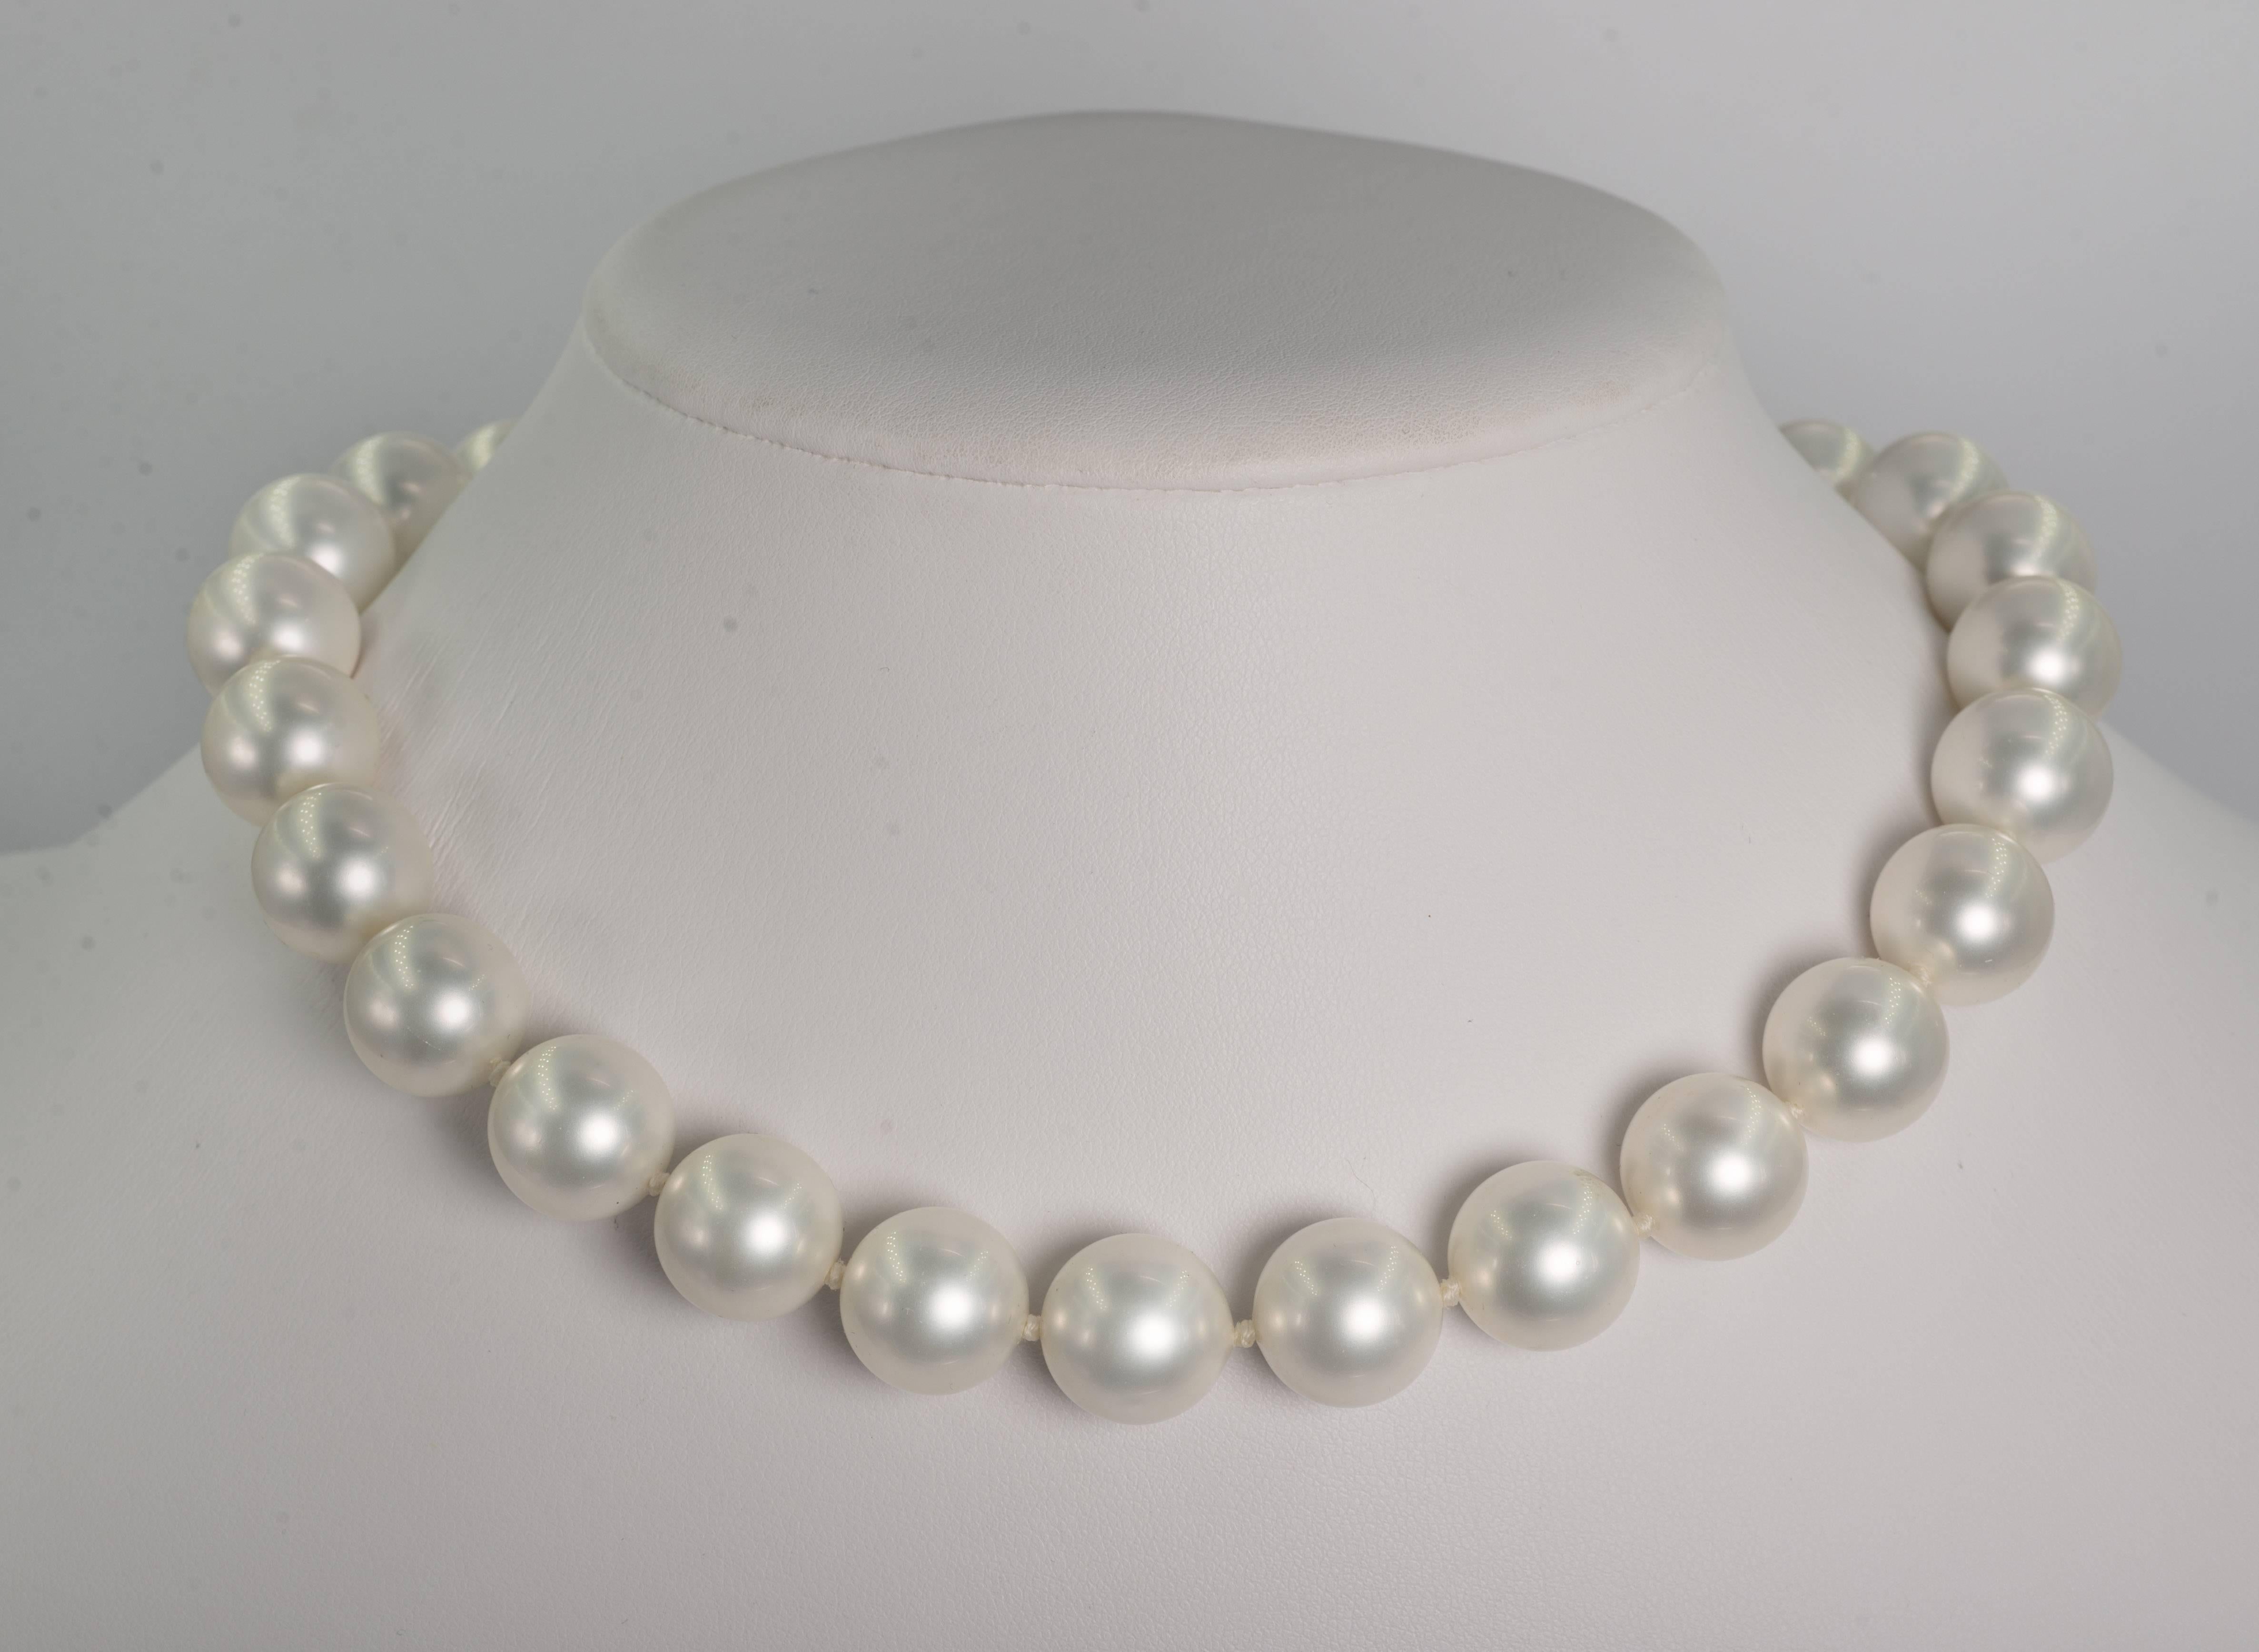 Faux 16mm South Sea Pearl Necklace measuring 18'' to a gilt pave cubic zirconia clasp. The pearls are made of mother of pearl and have a wonderful luminescent pearl coating. Freshly hand-strung knotted with silk threads.